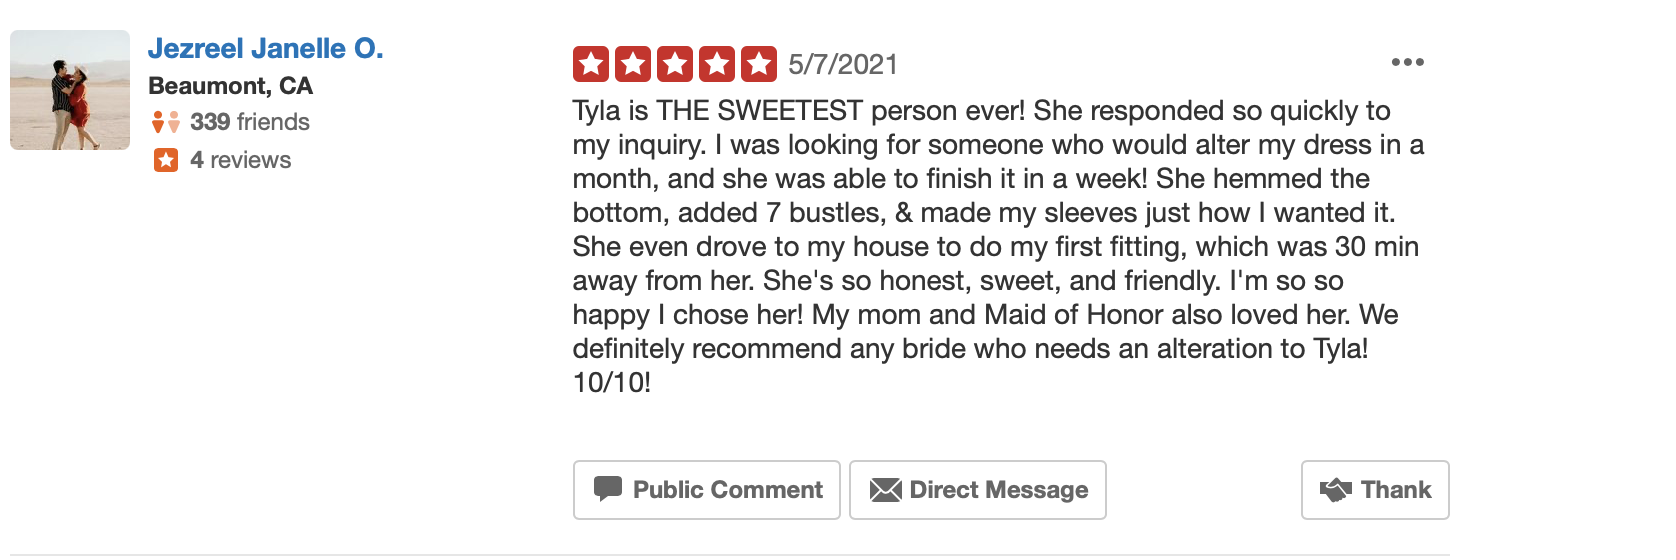 jezreel, left a review for tyla's bride, and how she got exactly what she wanted with her wedding dress alterations.